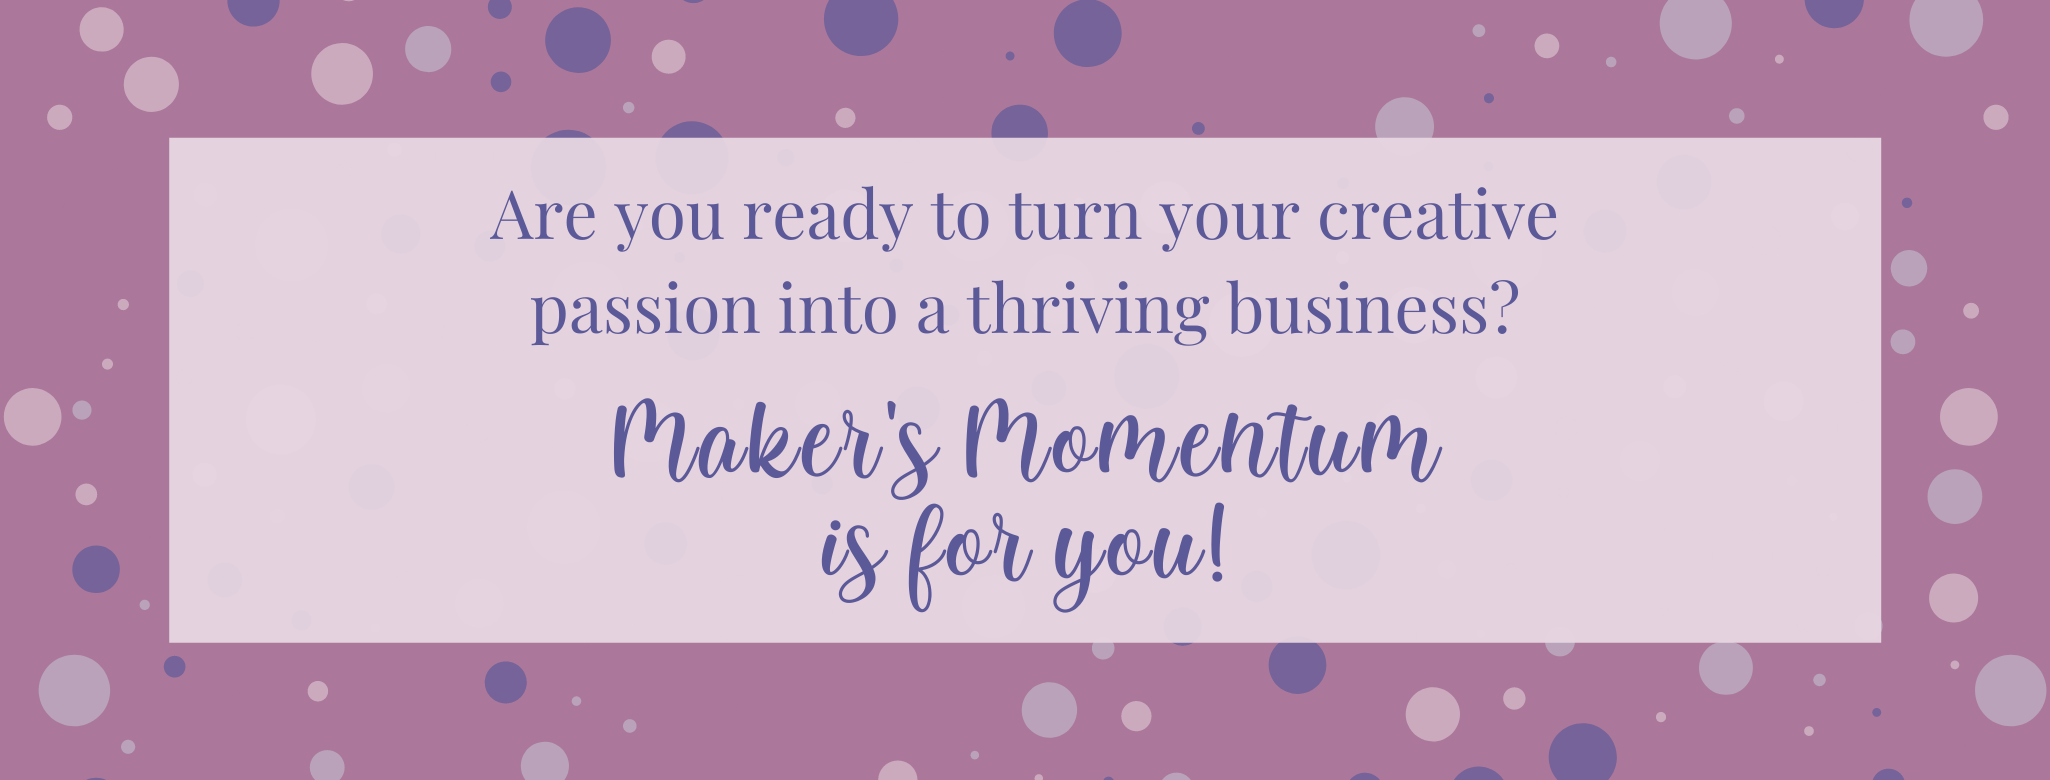 Maker's Momentum is for you!